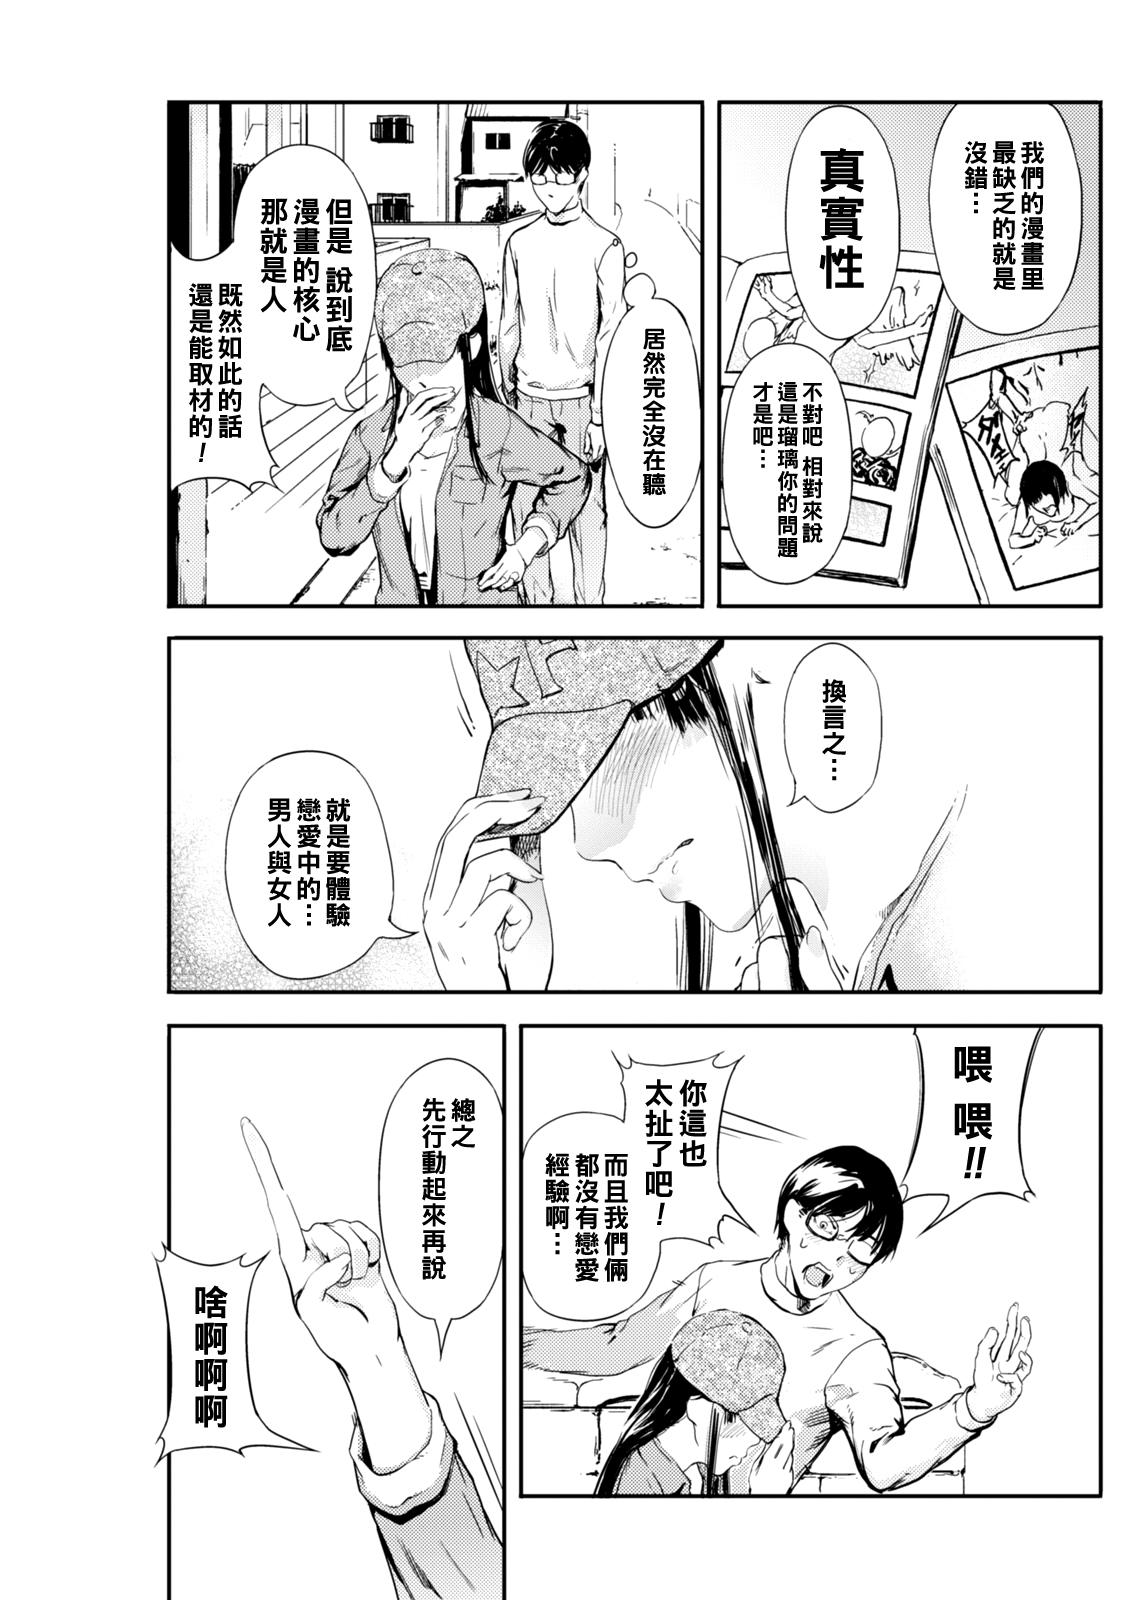 Anal Play 漫画ガール（Chinese） Tanned - Page 3